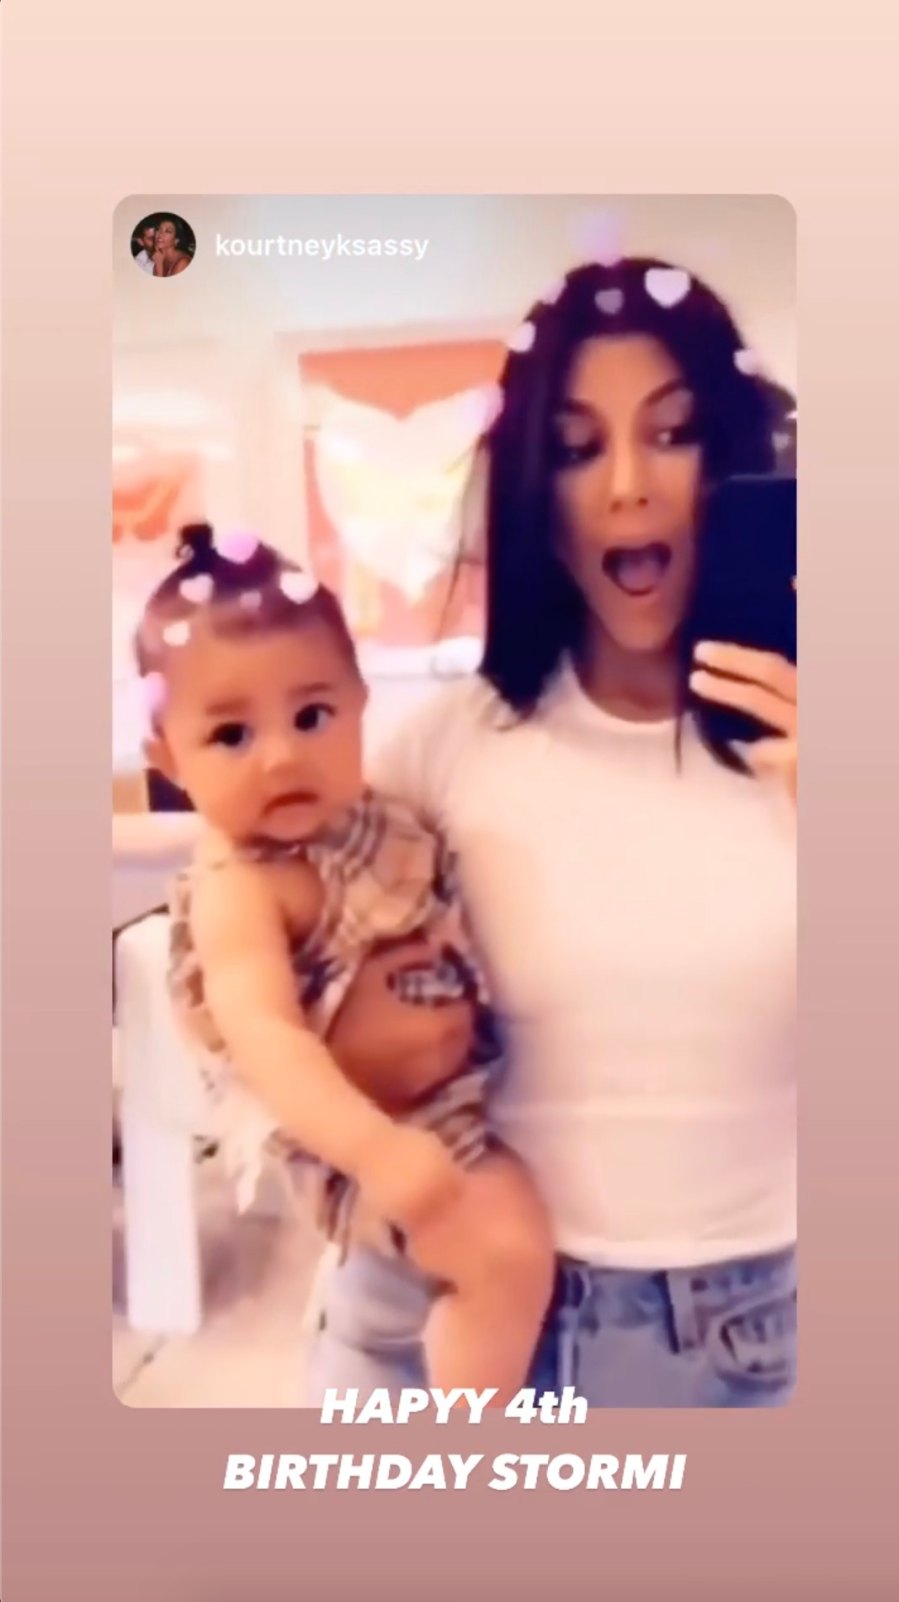 Kylie Jenner's Daughter Stormi's Well-Wishes From Family Kourtney Kardashian